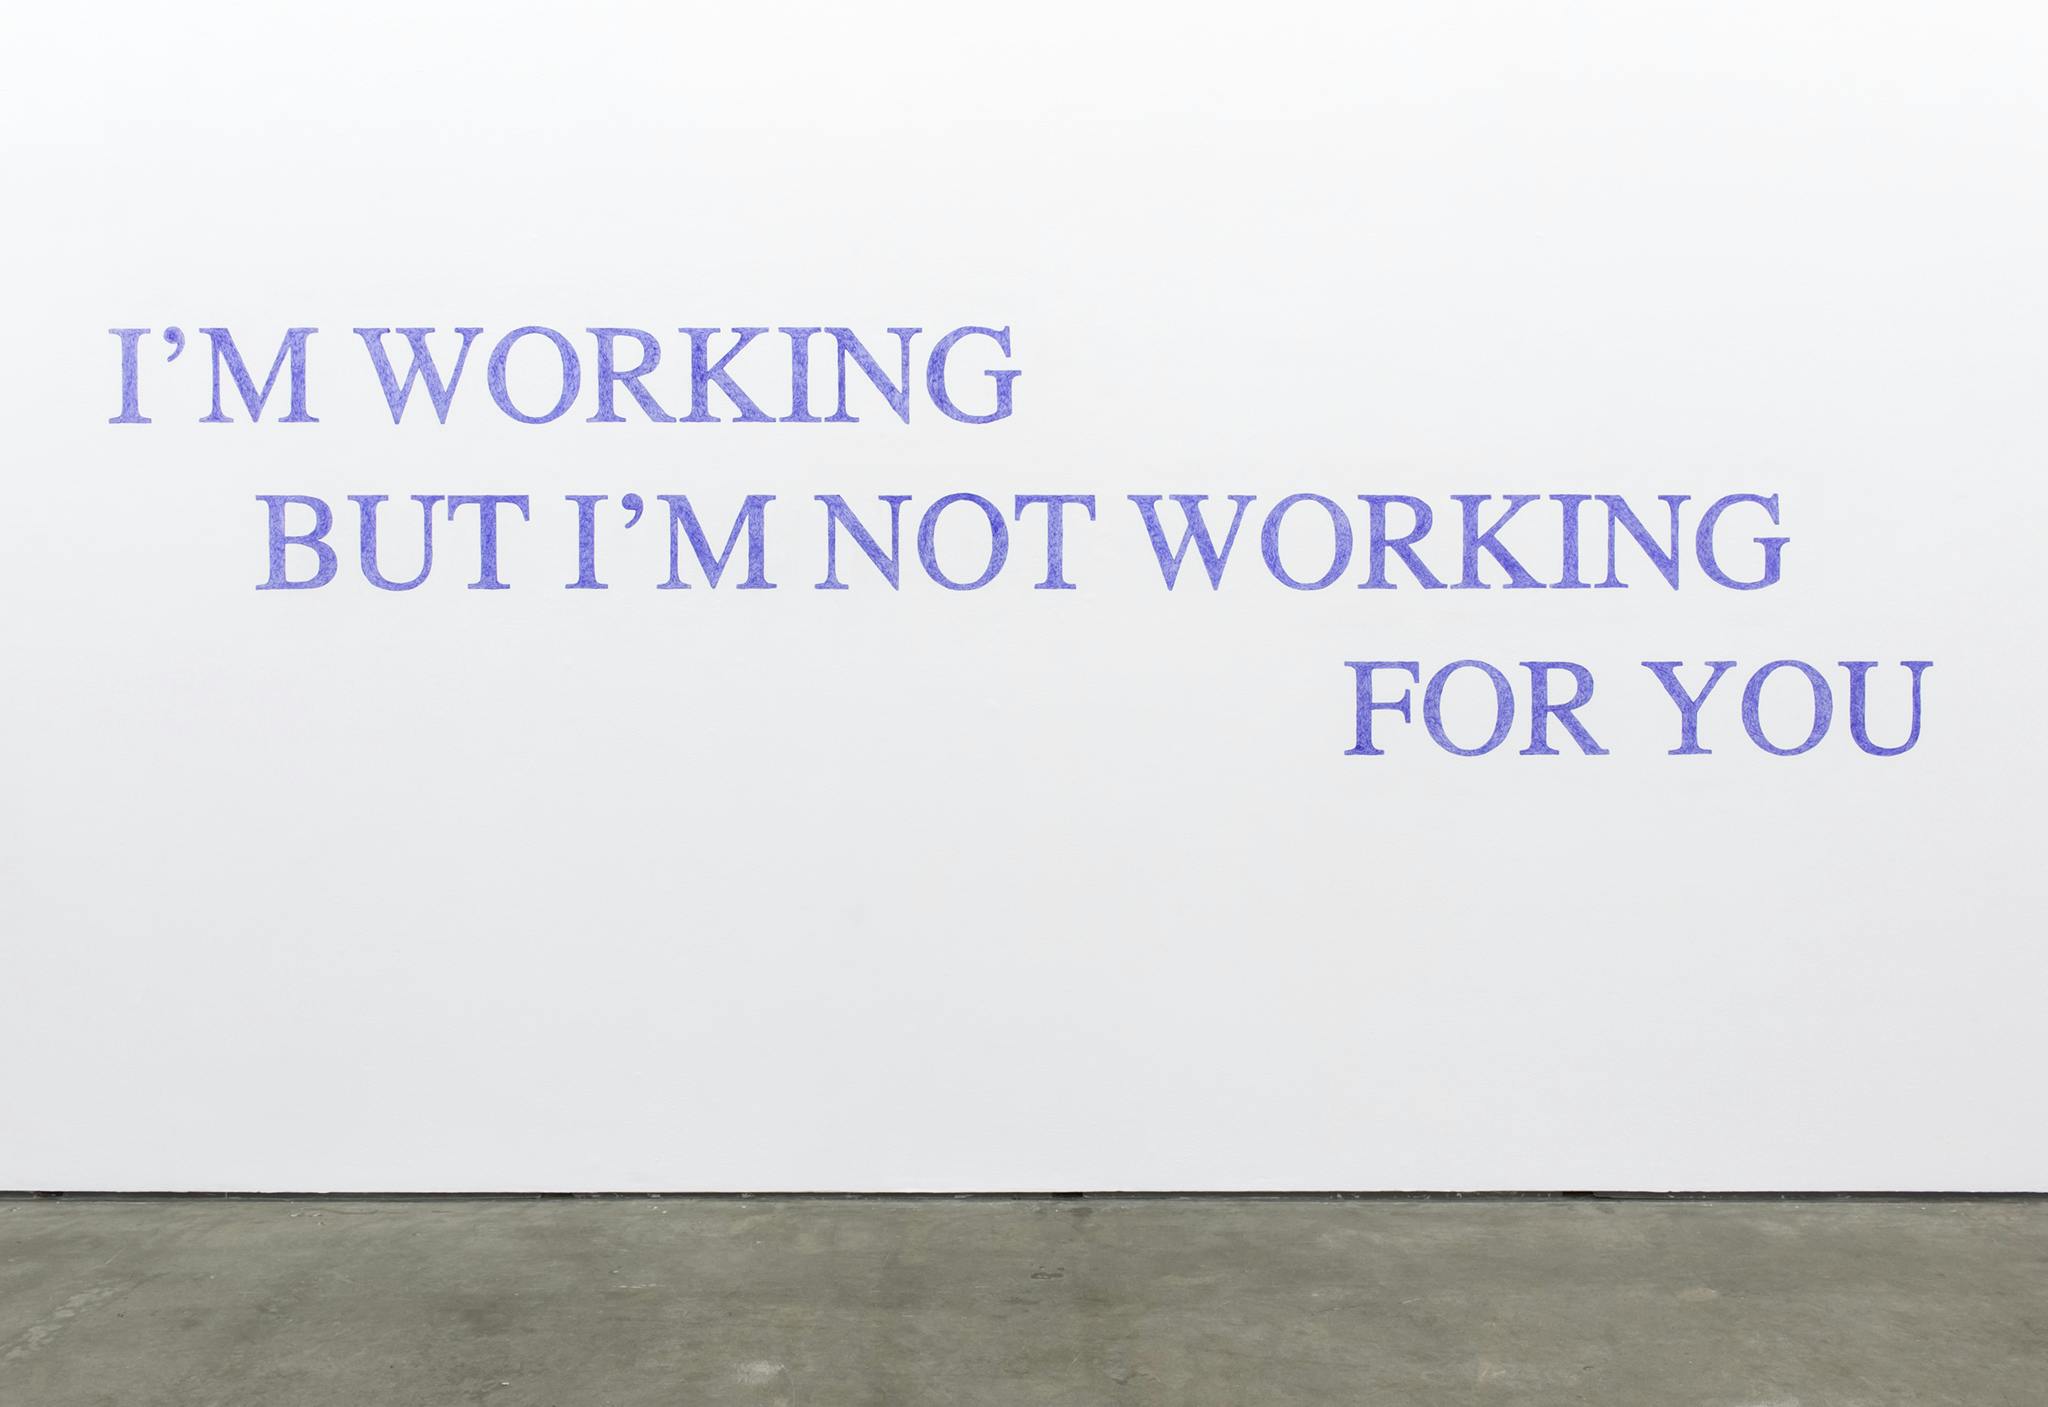 Large blue text on the wall of a gallery space that reads “I’M WORKING BUT I’M NOT WORKING FOR YOU.”